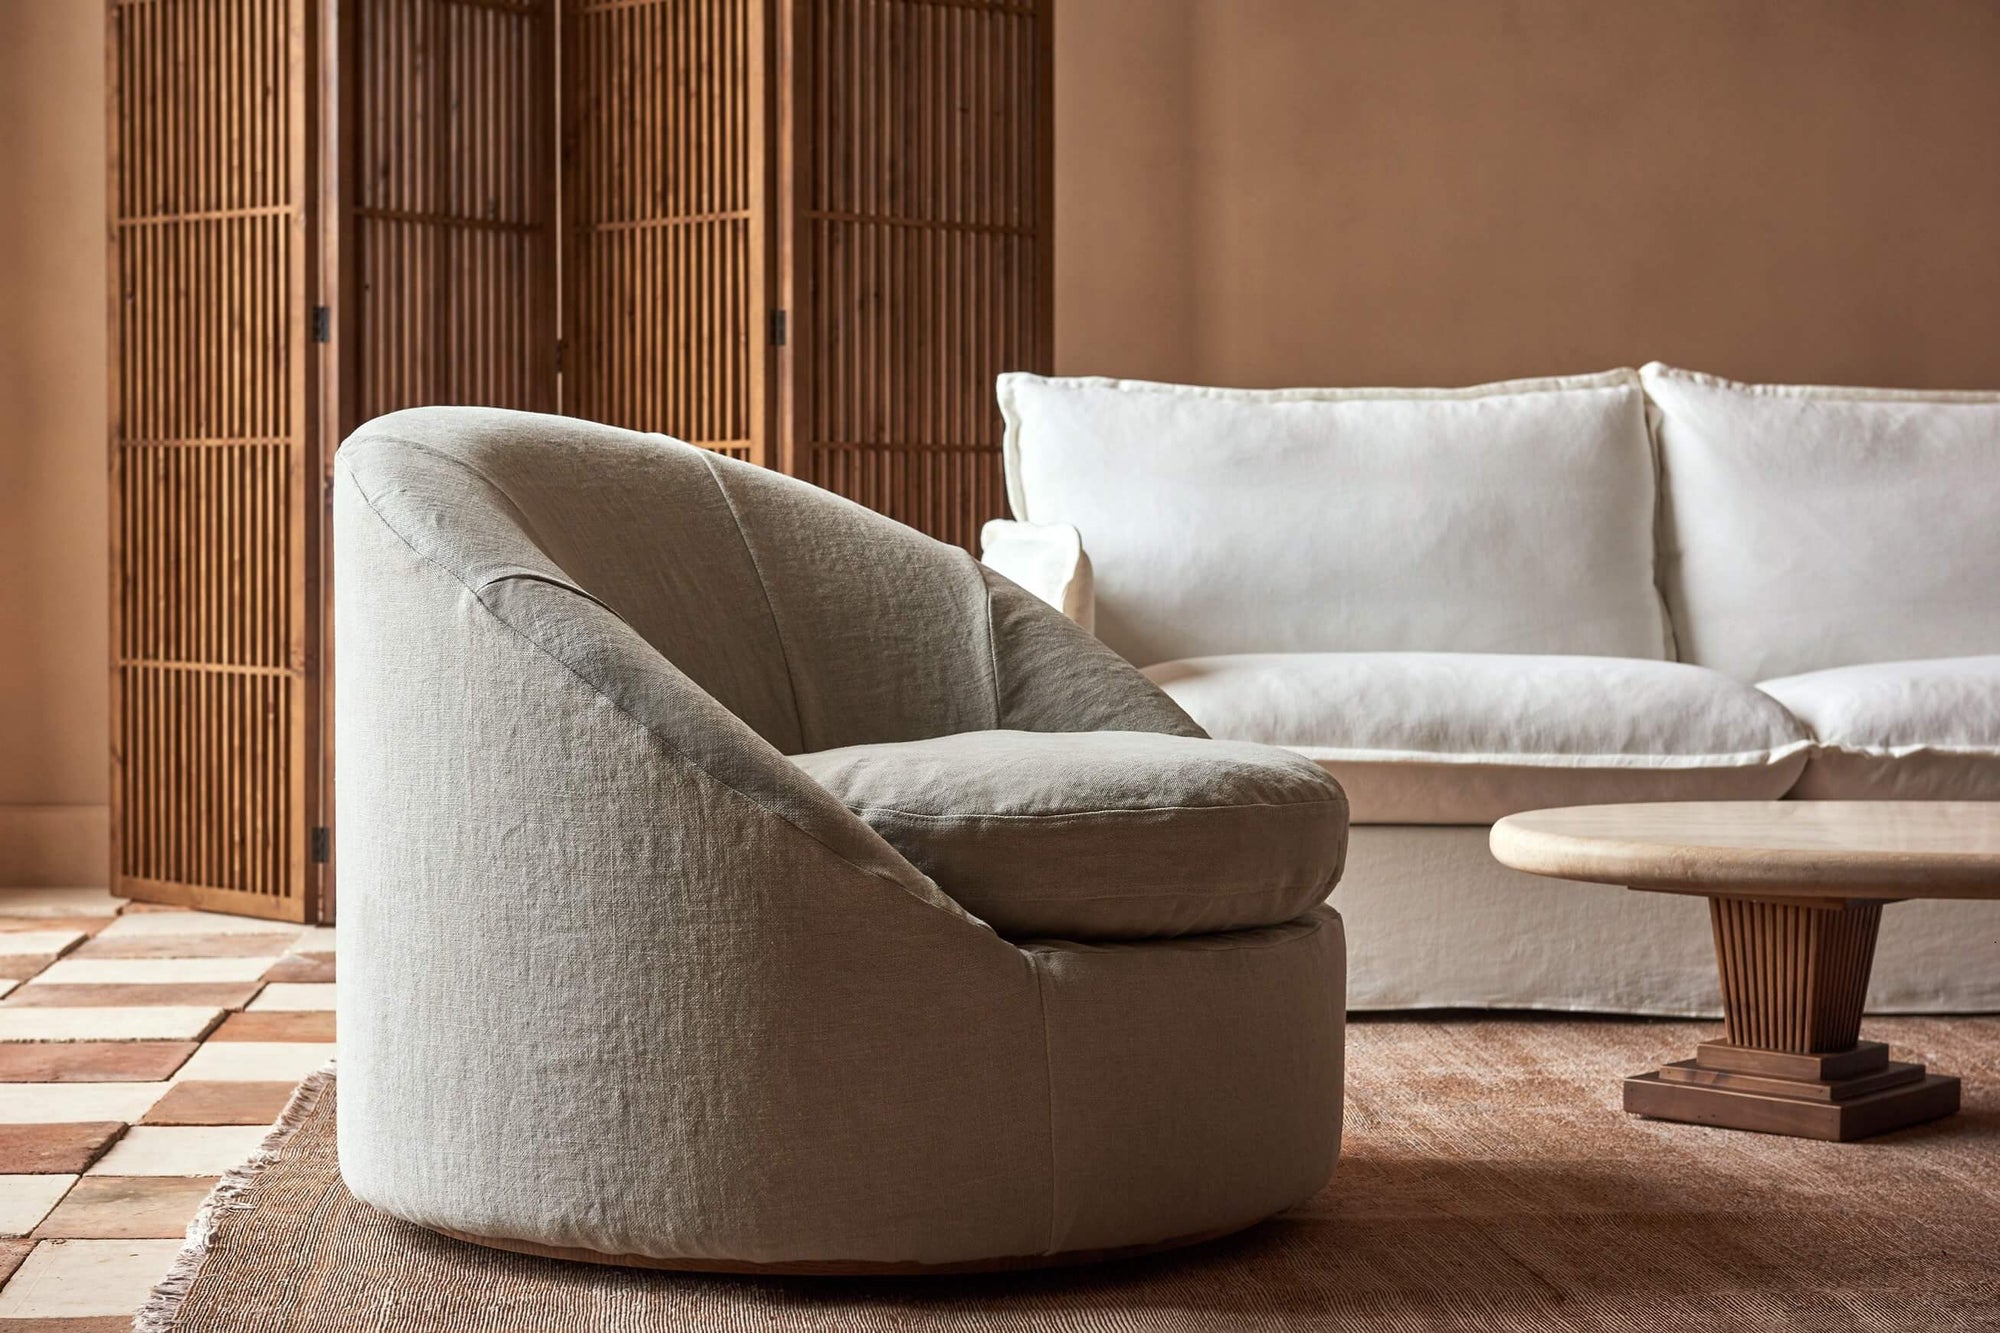 Olea Swivel Chair in Jasmine Rice, a light warm greige Medium Weight Linen placed in a sunlit room in front of a Neva Sofa and Cordelia Coffee Table